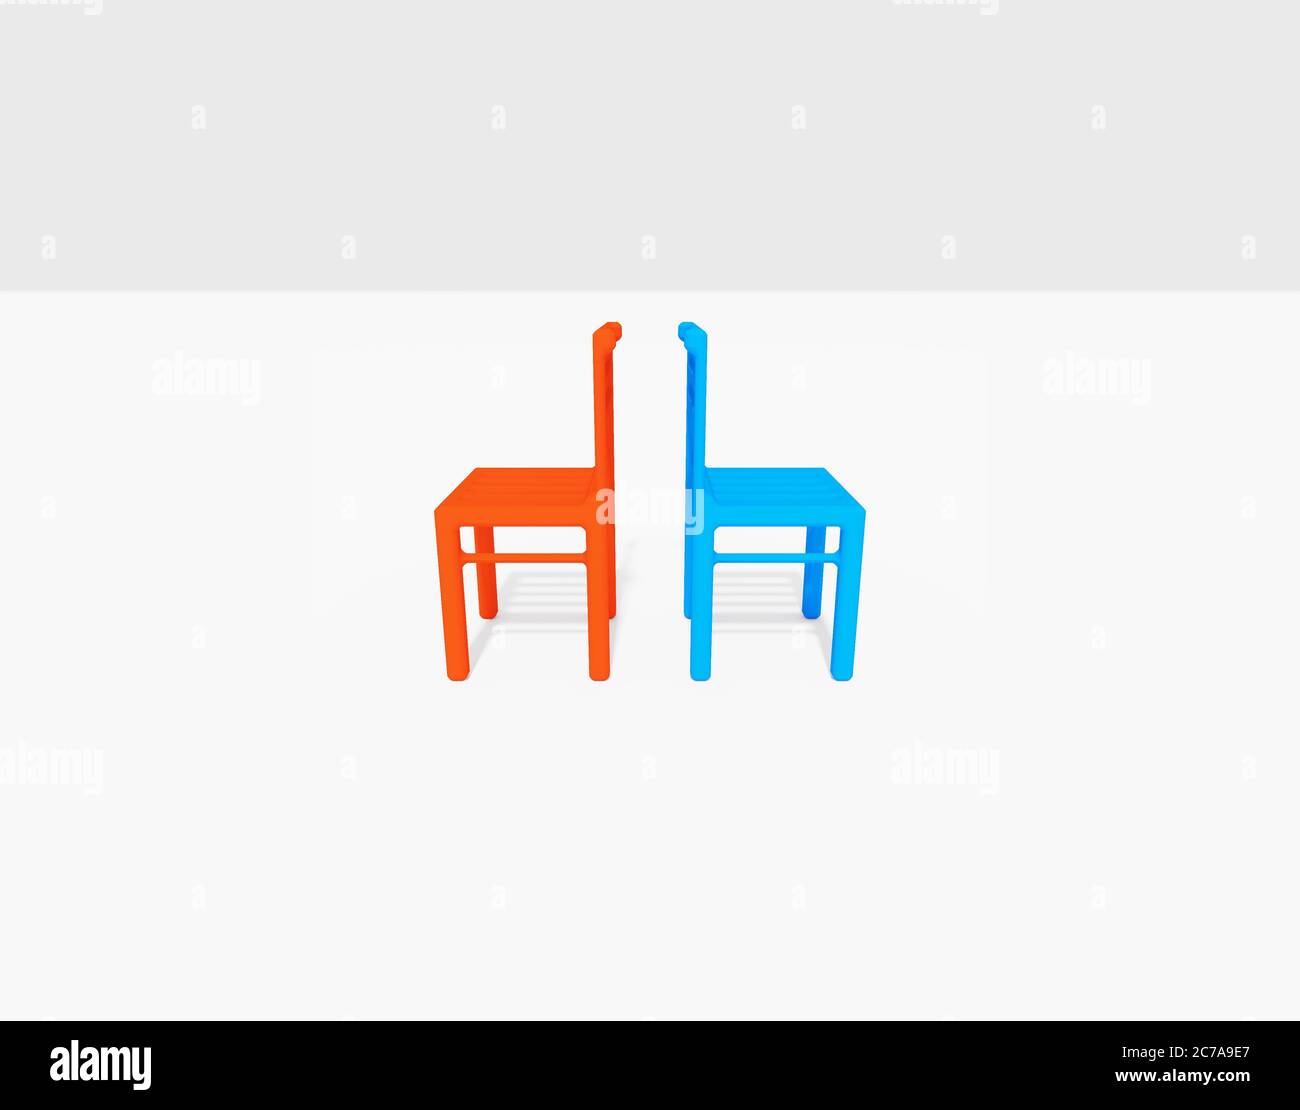 Red and blue empty minimalist  chairs standing back to back contracts loans idea stock picture, 3D illustration isolated Stock Photo